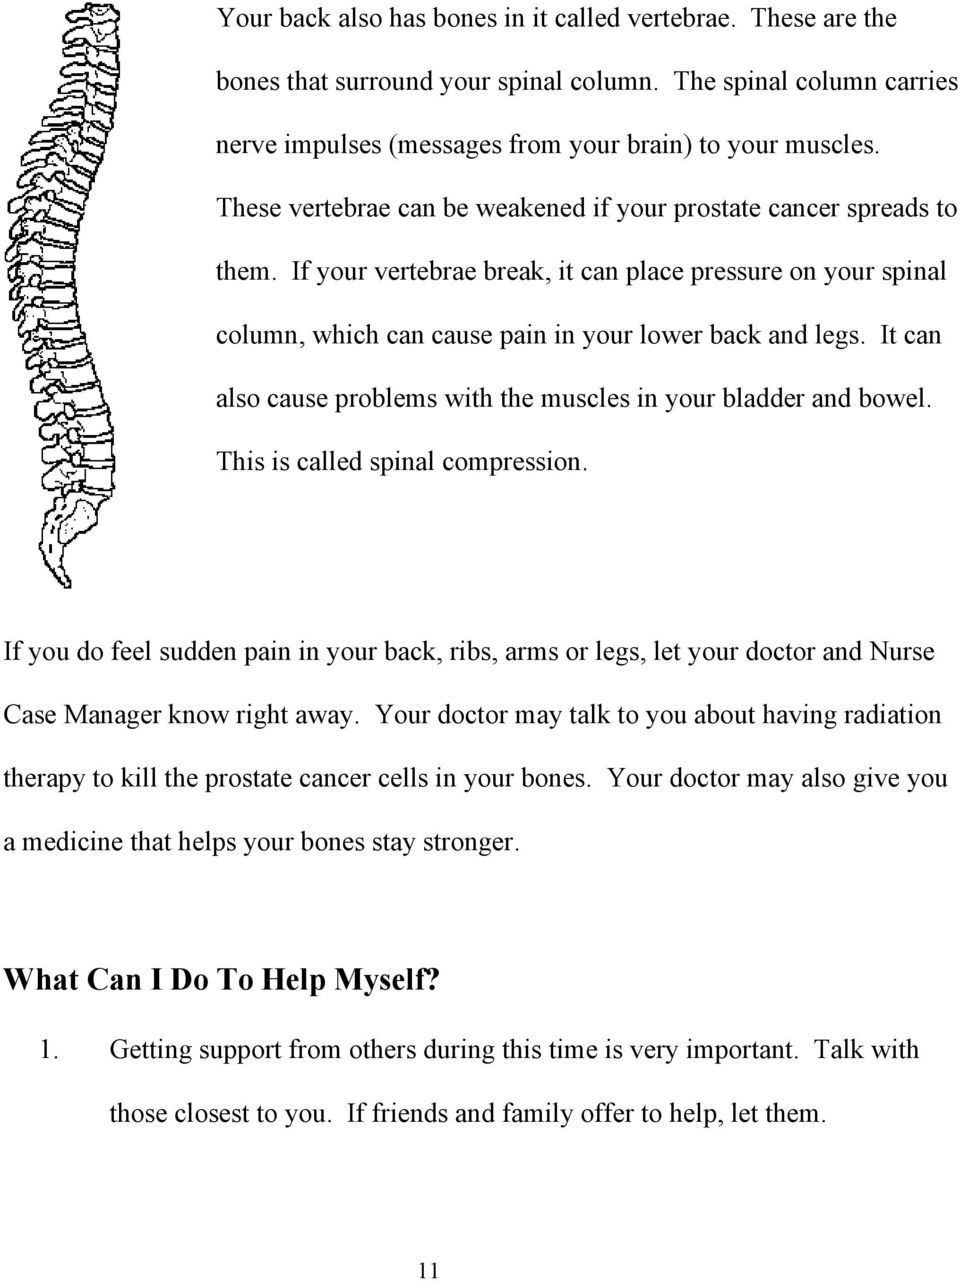 It can also cause problems with the muscles in your bladder and bowel. This is called spinal compression.